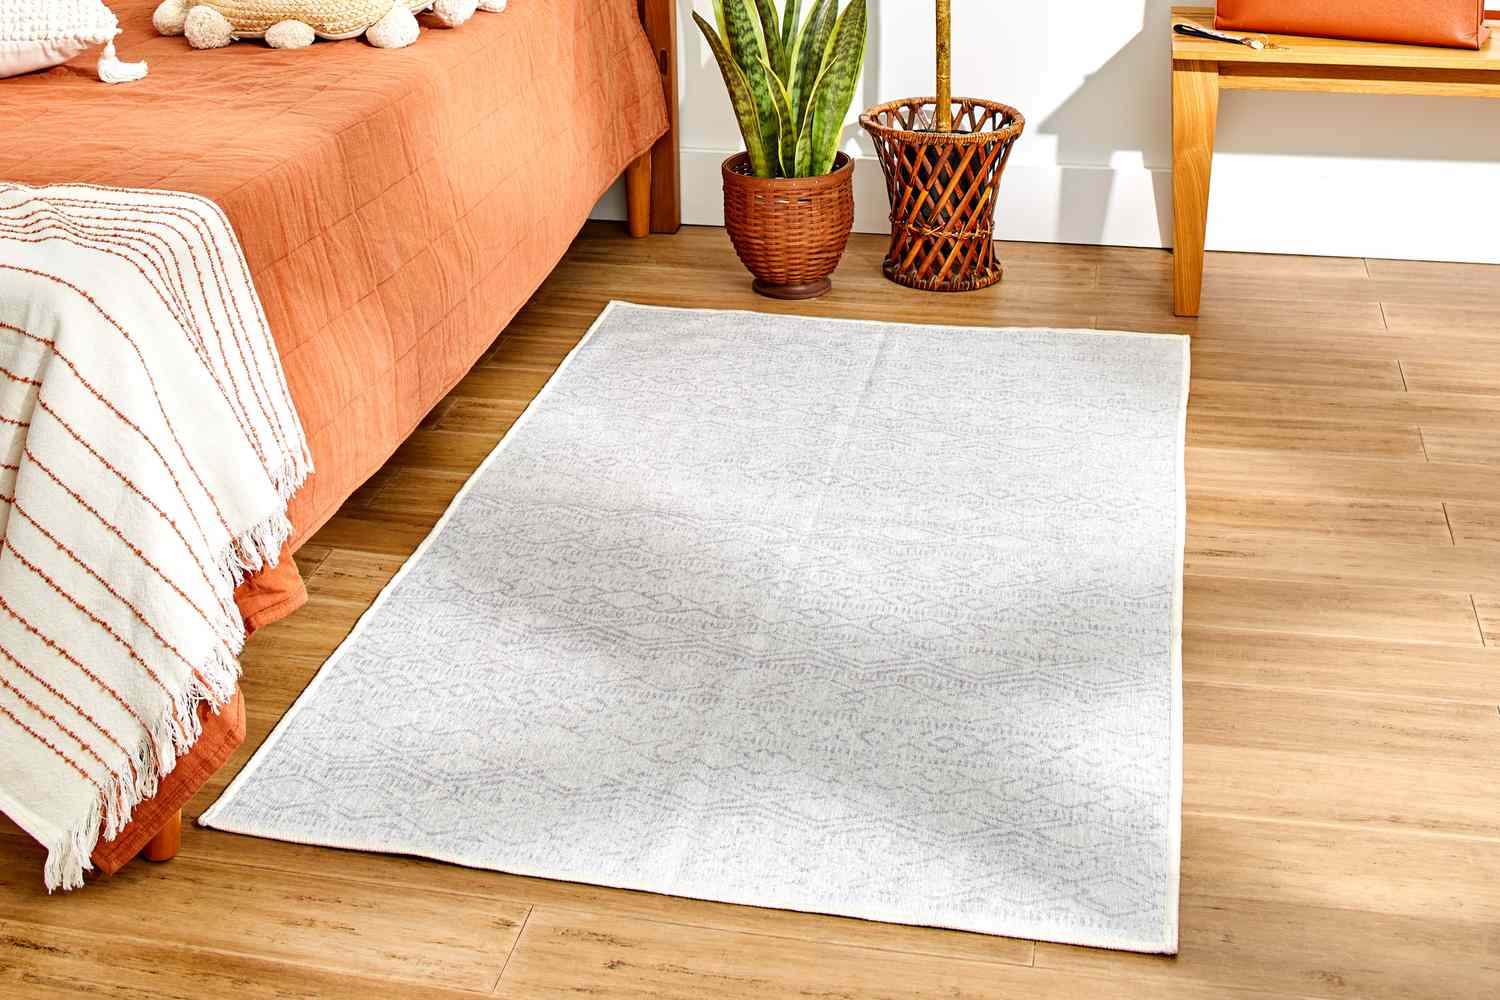 The Tumble Tabor Washable Rug & Cushioned Rug Pad in a bedroom setting